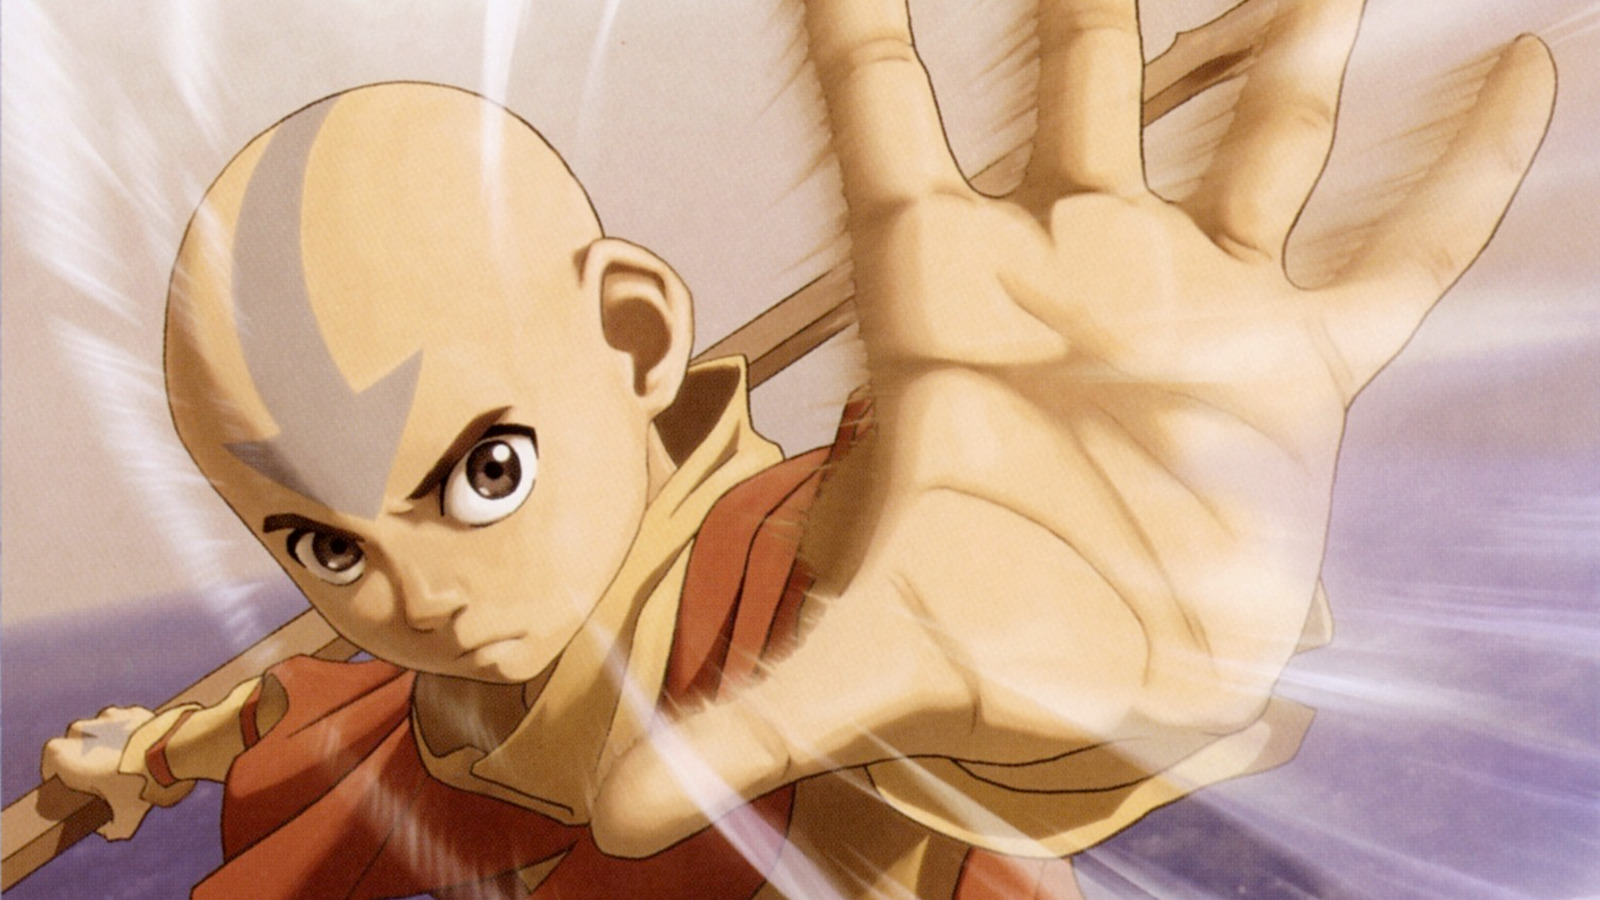 Avatar The Last Airbender Aang Wallpapers Hd Desktop And Mobile Backgrounds 7929